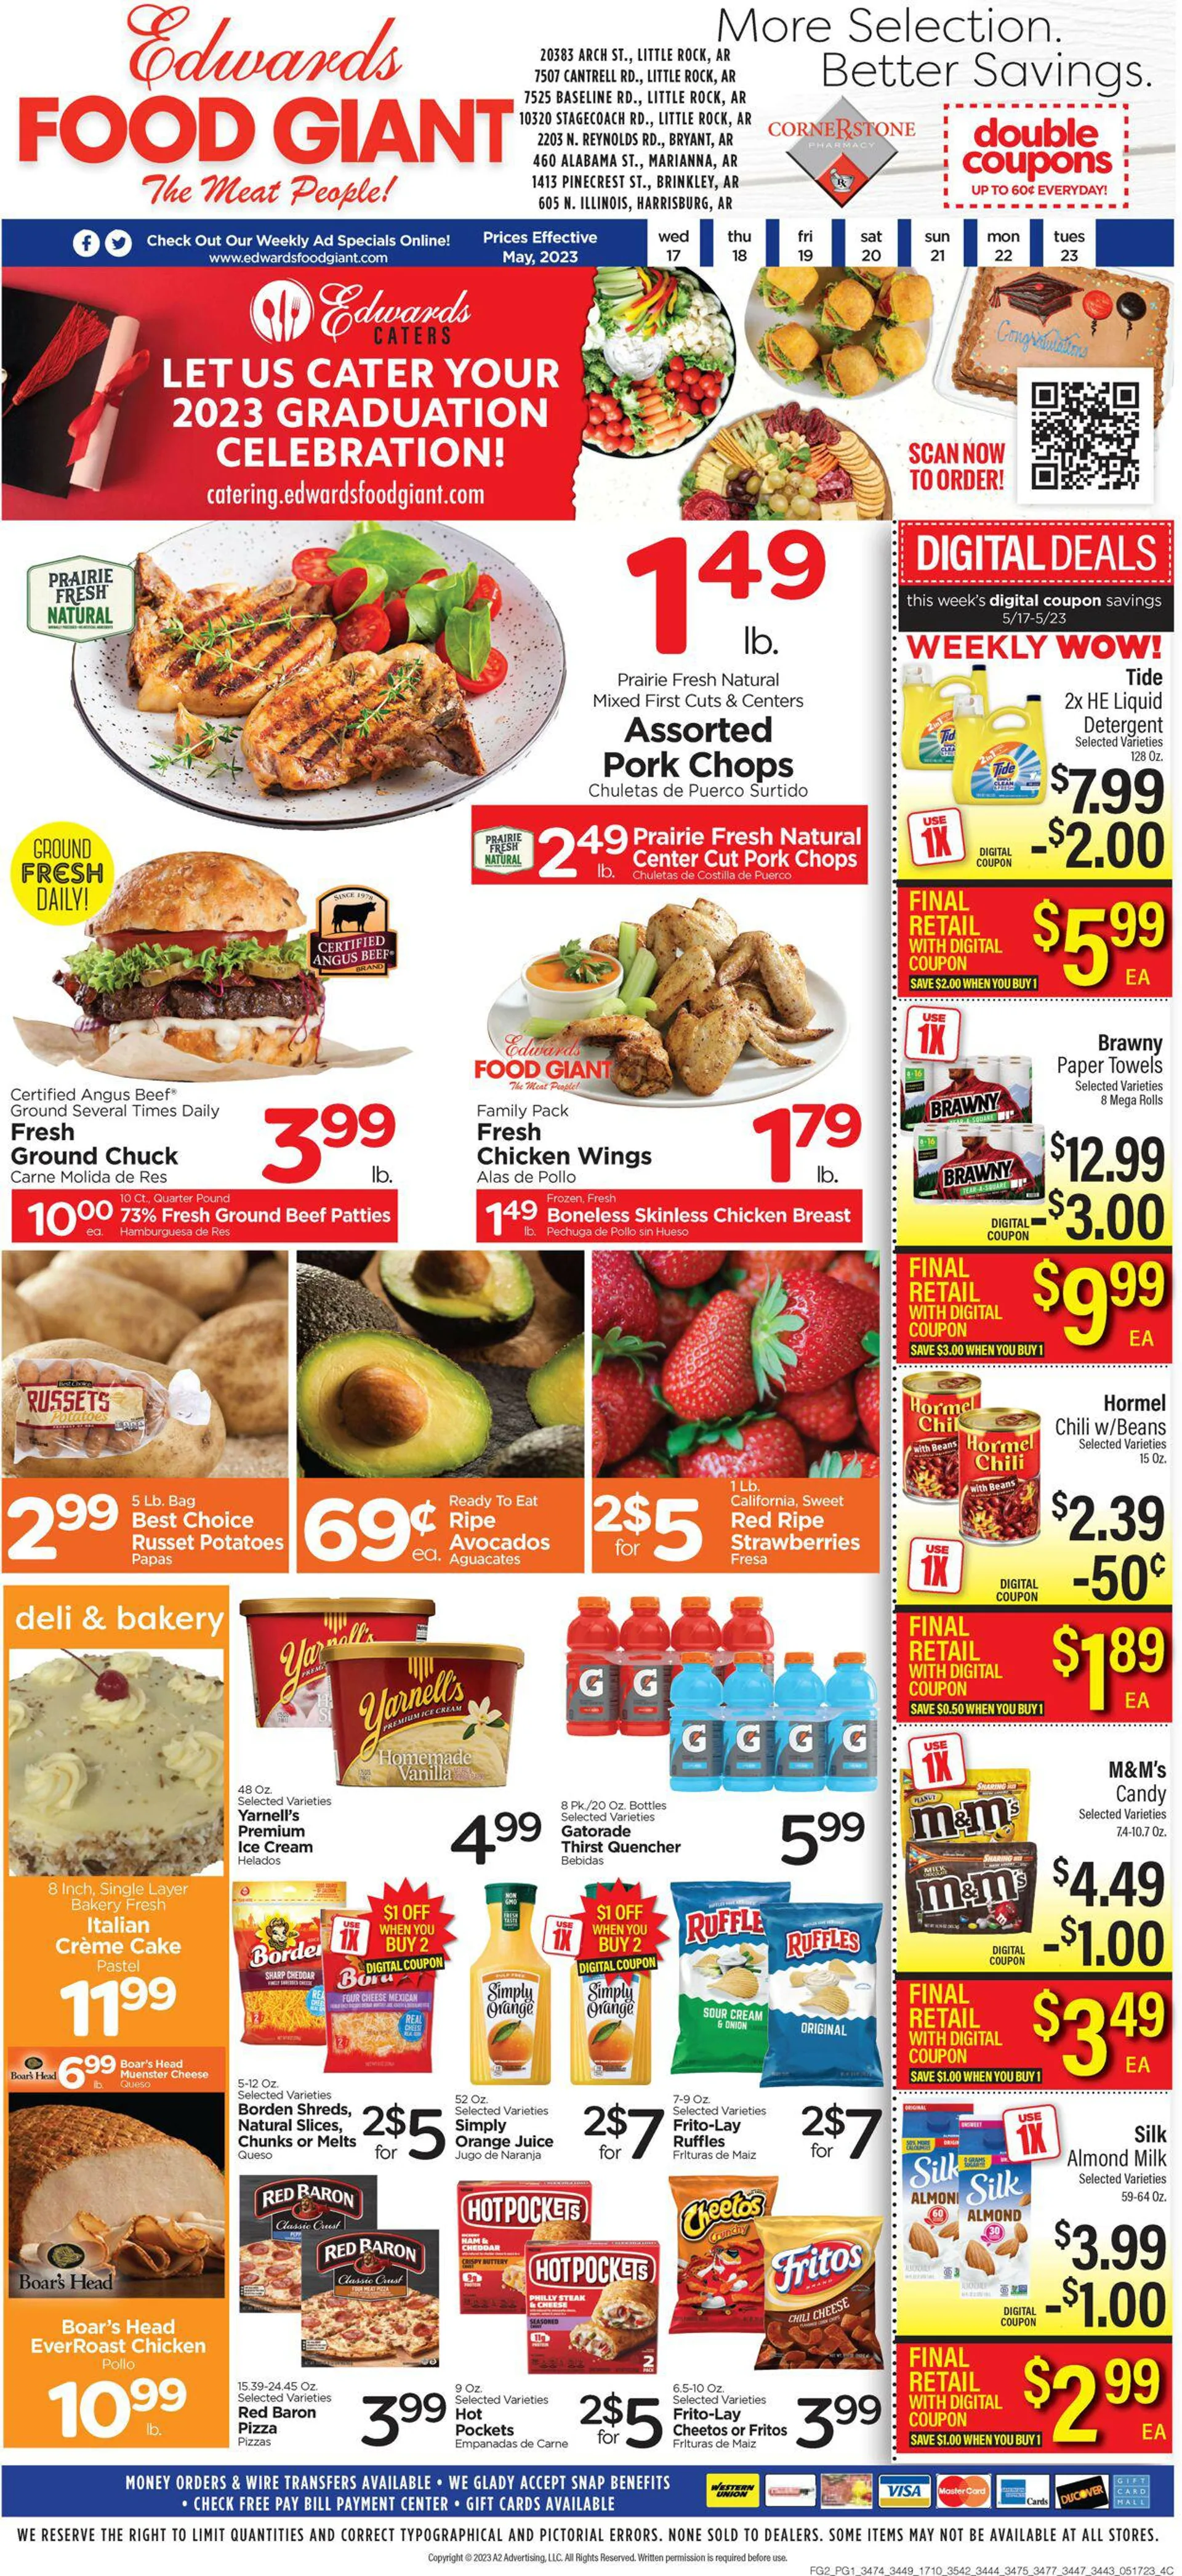 Edwards Food Giant Current weekly ad - 1